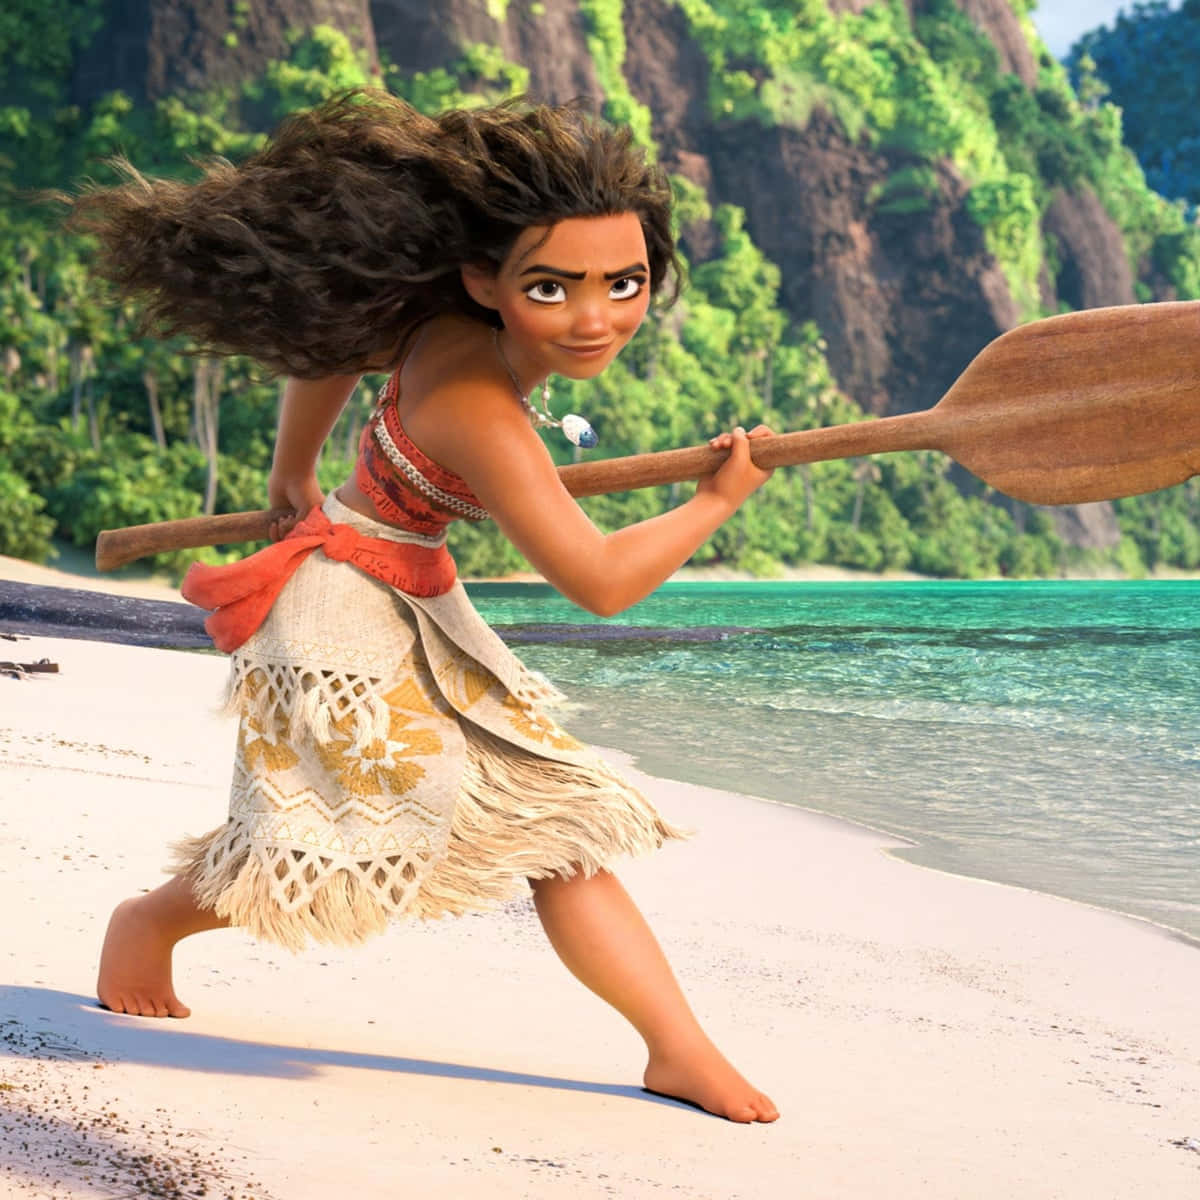 Moana on the Journey of Discovery